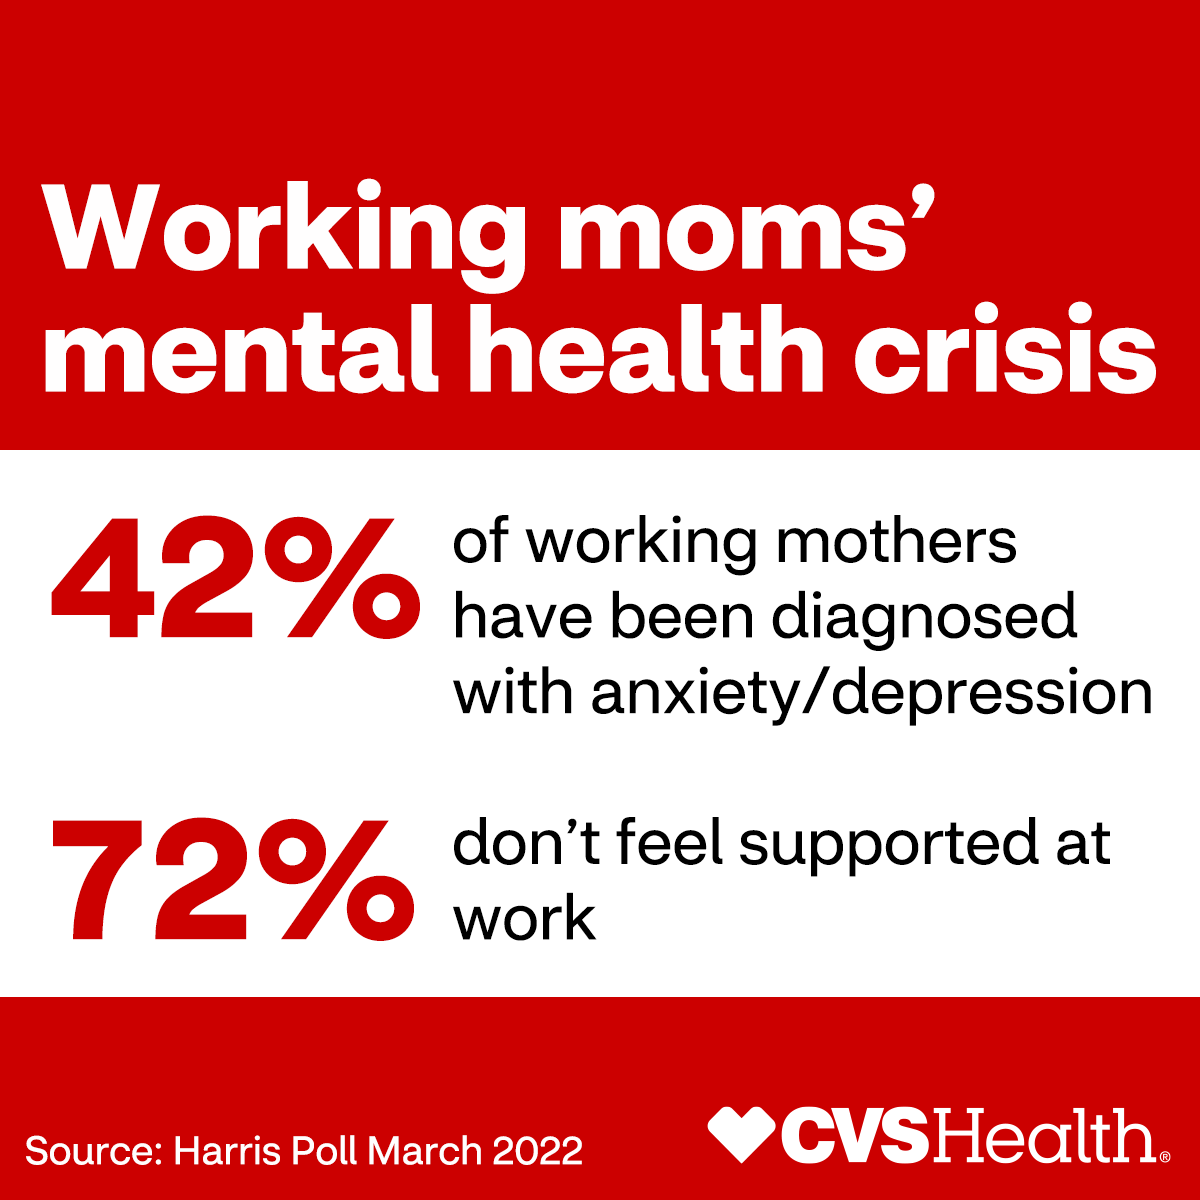 Working mothers face a mental health epidemic. According to 2022 Harris Poll data commissioned by CVS Health, more working mothers have been diagnosed with anxiety and/or depression than the general population. Learn more: cvs.co/3sA8cus